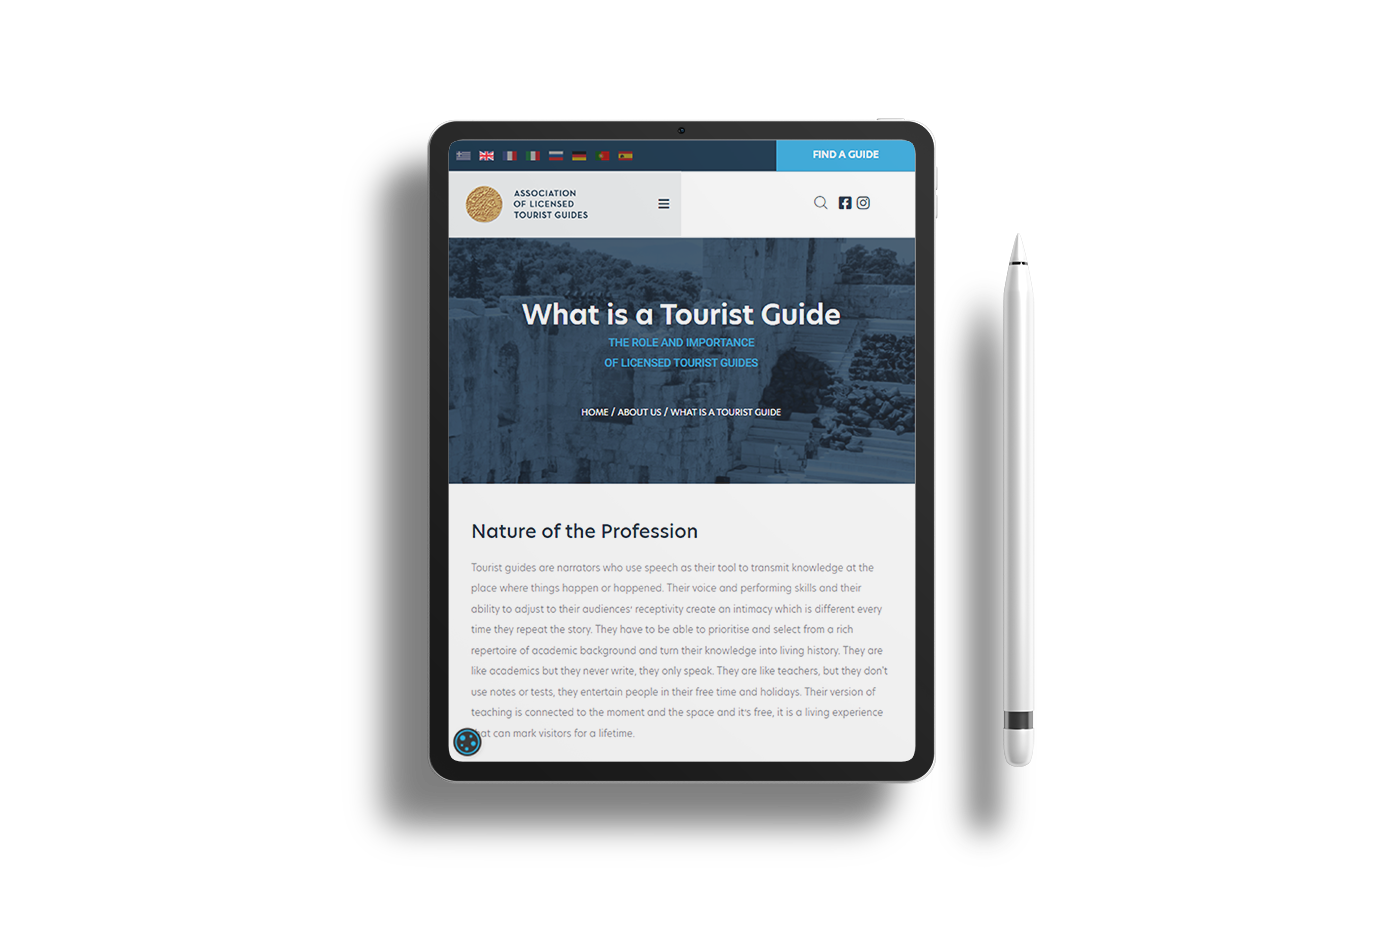 TOURISM Association of Licensed Tourists Guides